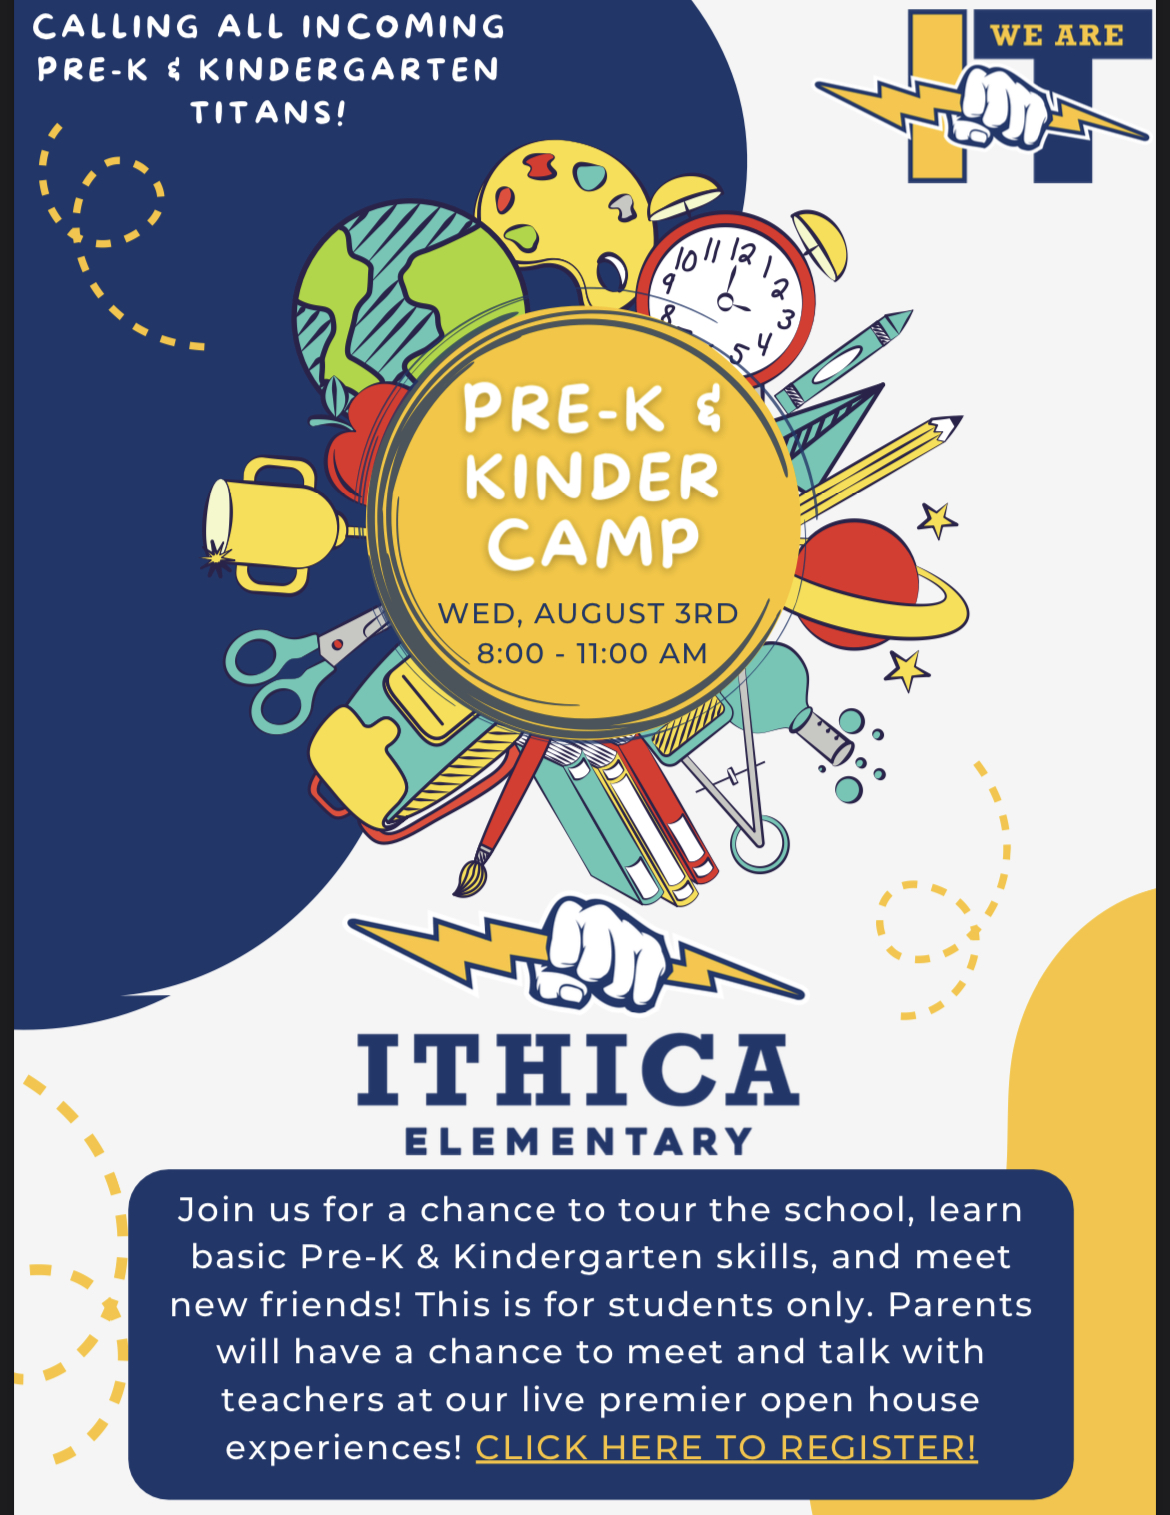 prek and kindergarten camp on August 3rd. click here to register